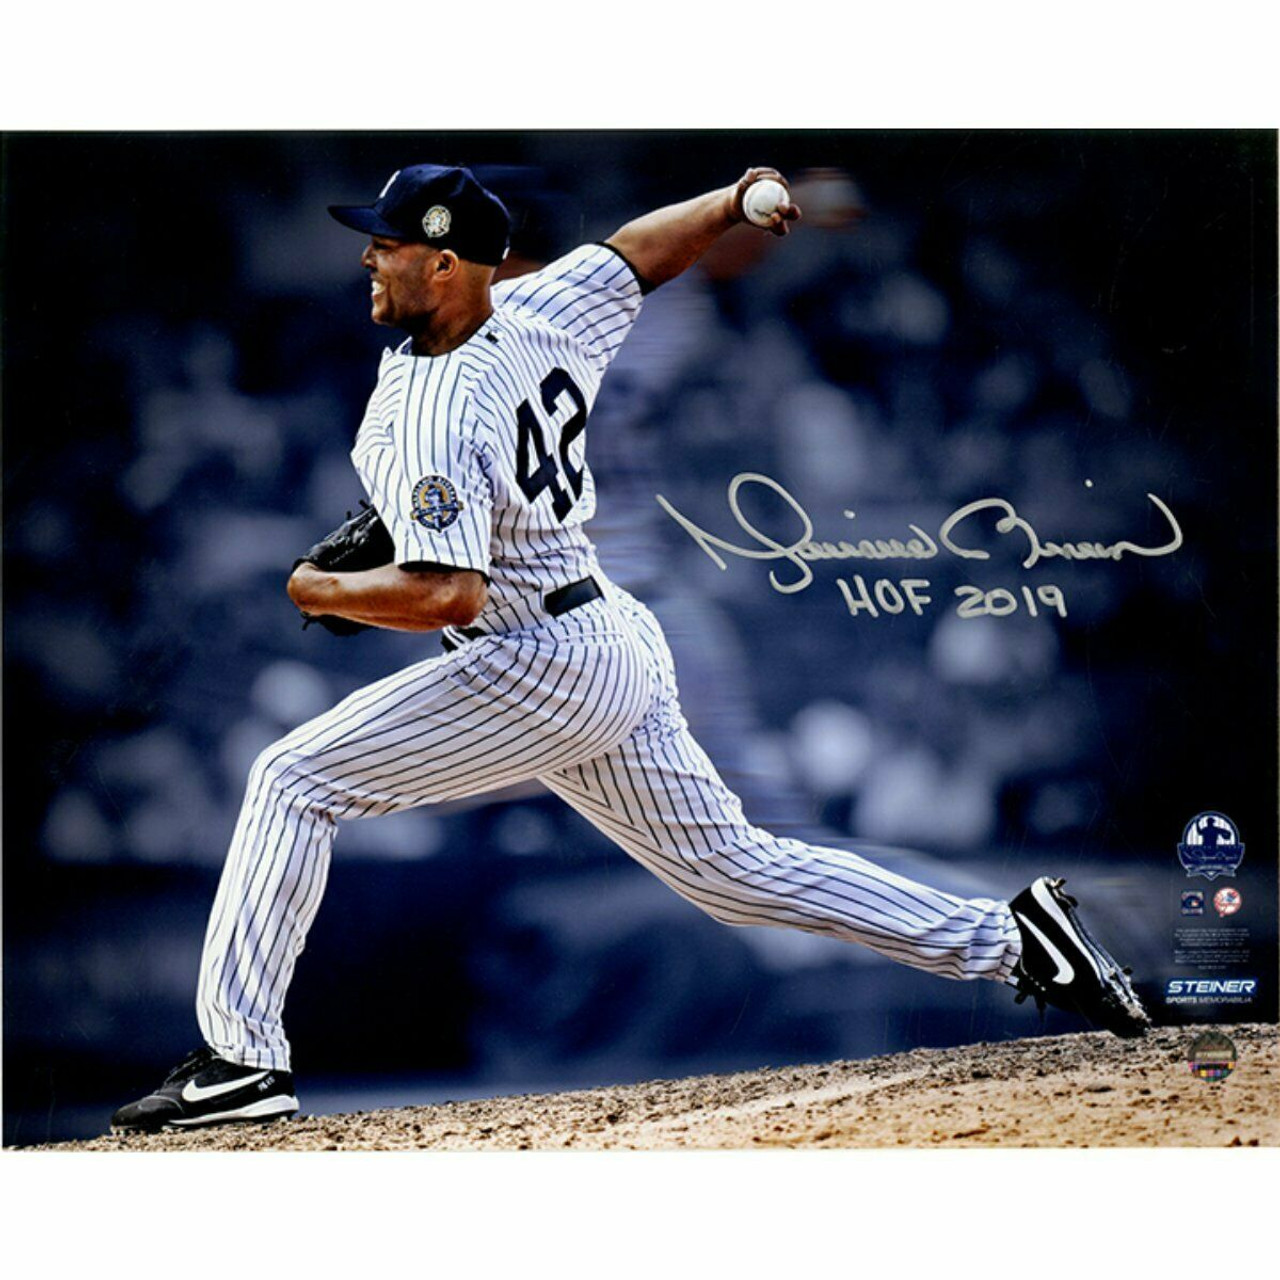 MARIANO RIVERA New York Yankees Autographed / Inscribed HOF 2019  'Pitching' 8 x 10 Photograph STEINER - Game Day Legends